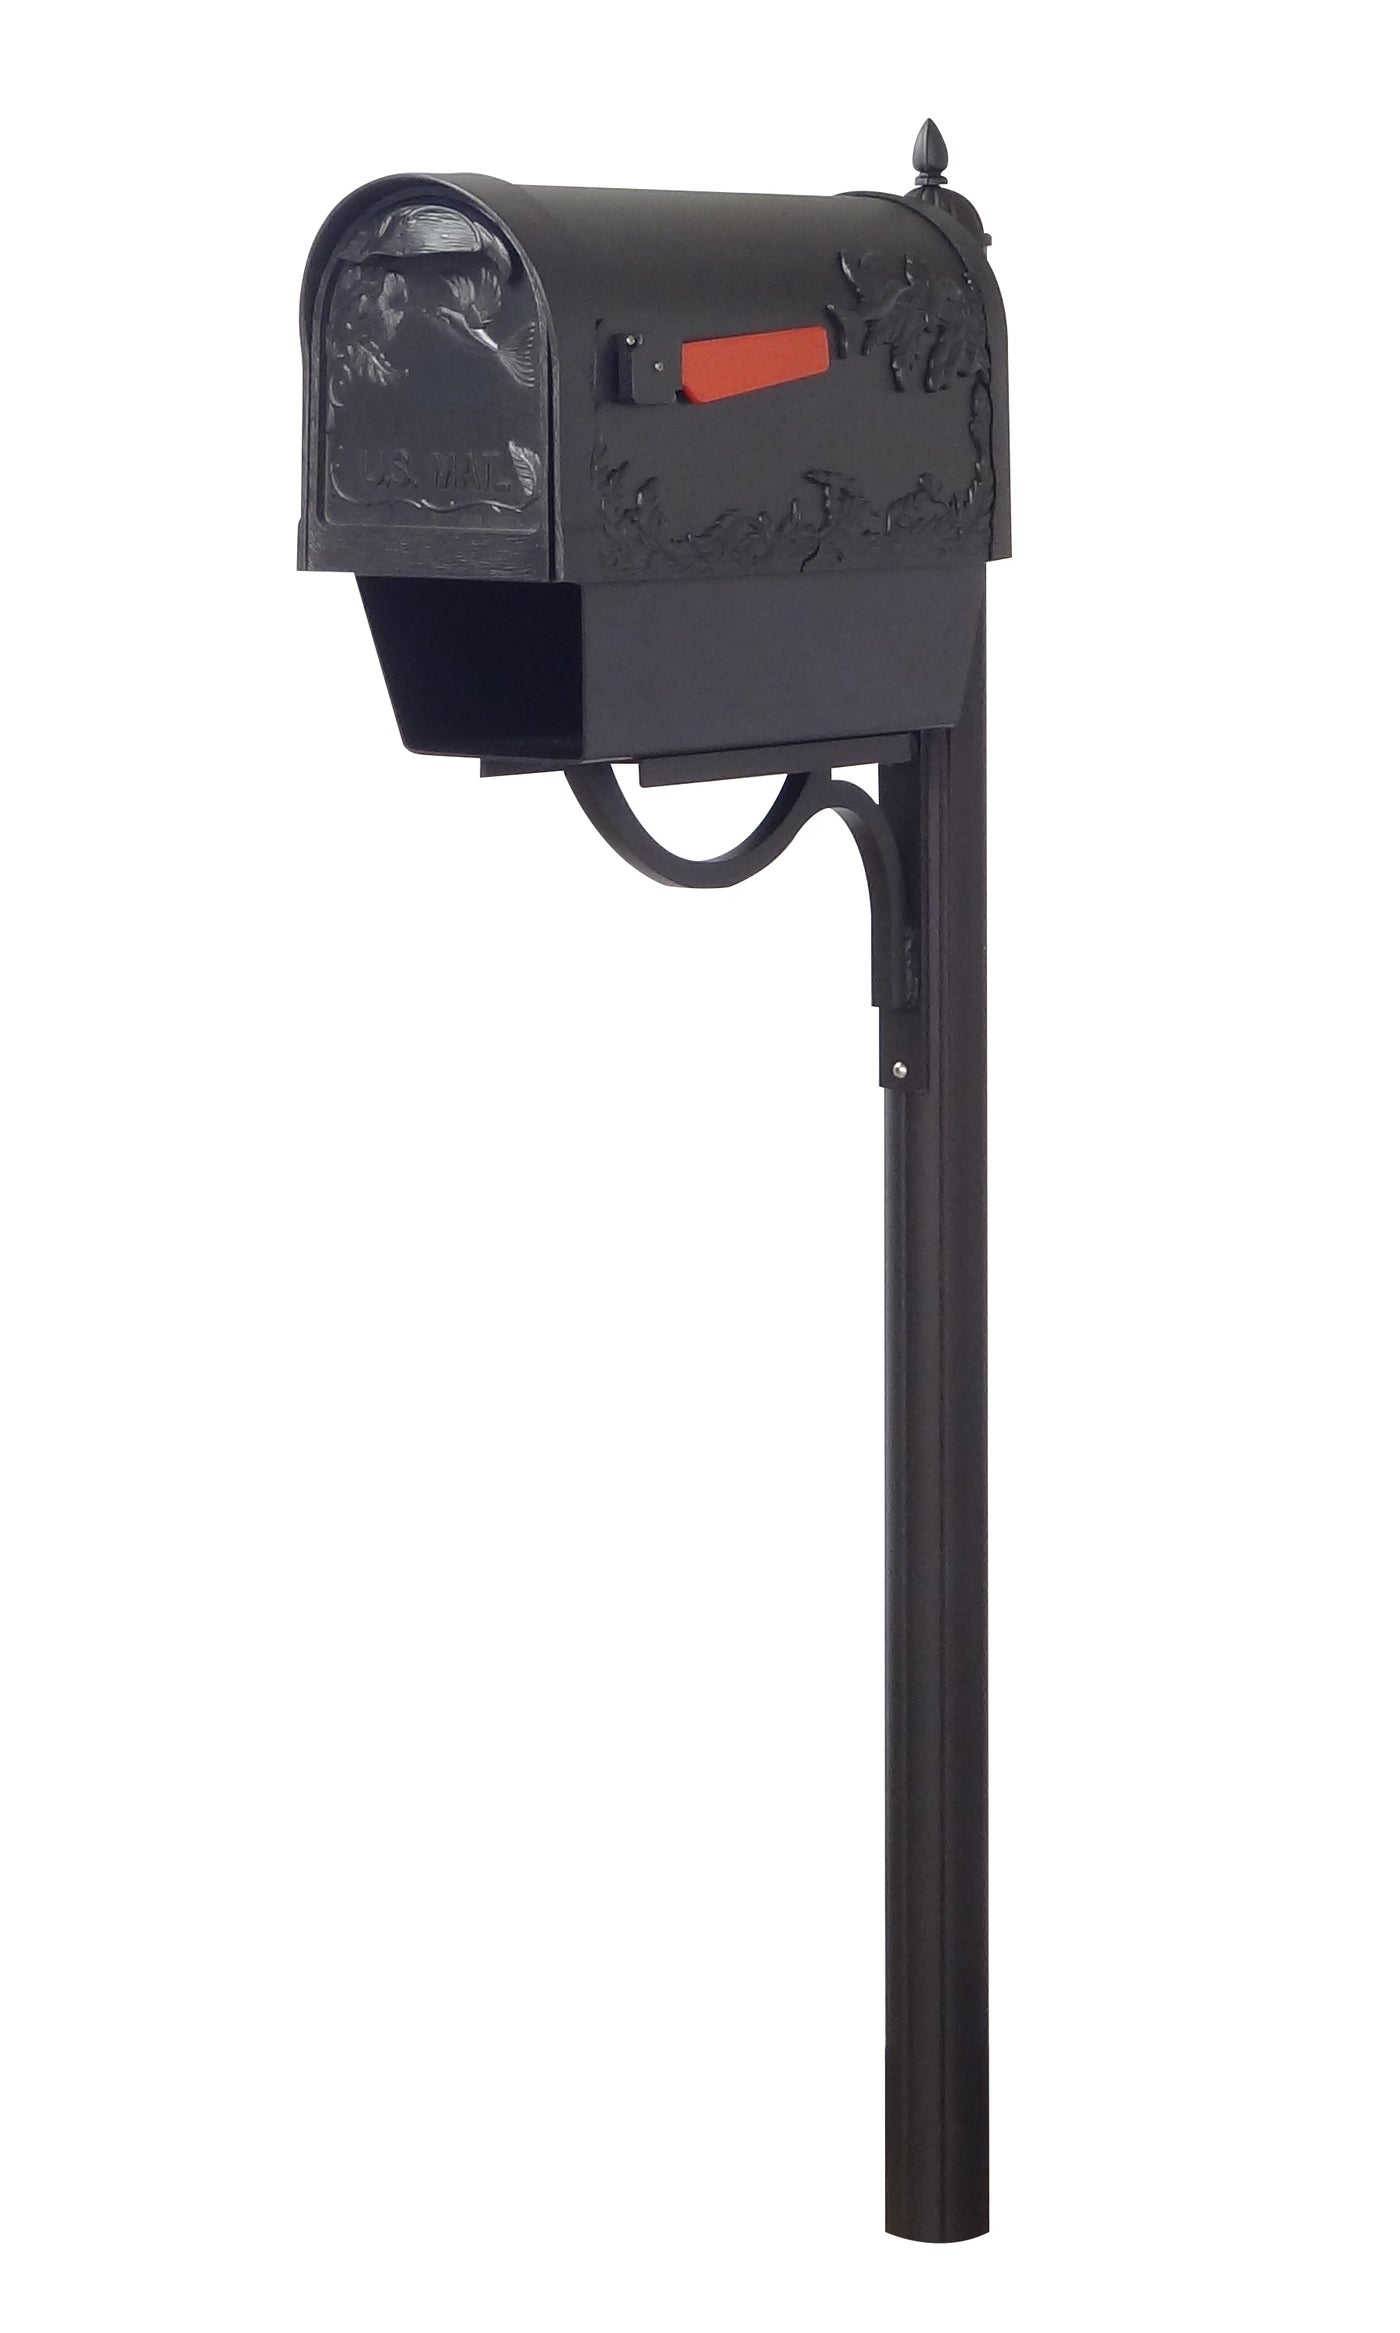 Hummingbird Curbside Mailbox with Paper Tube and Richland Mailbox Post